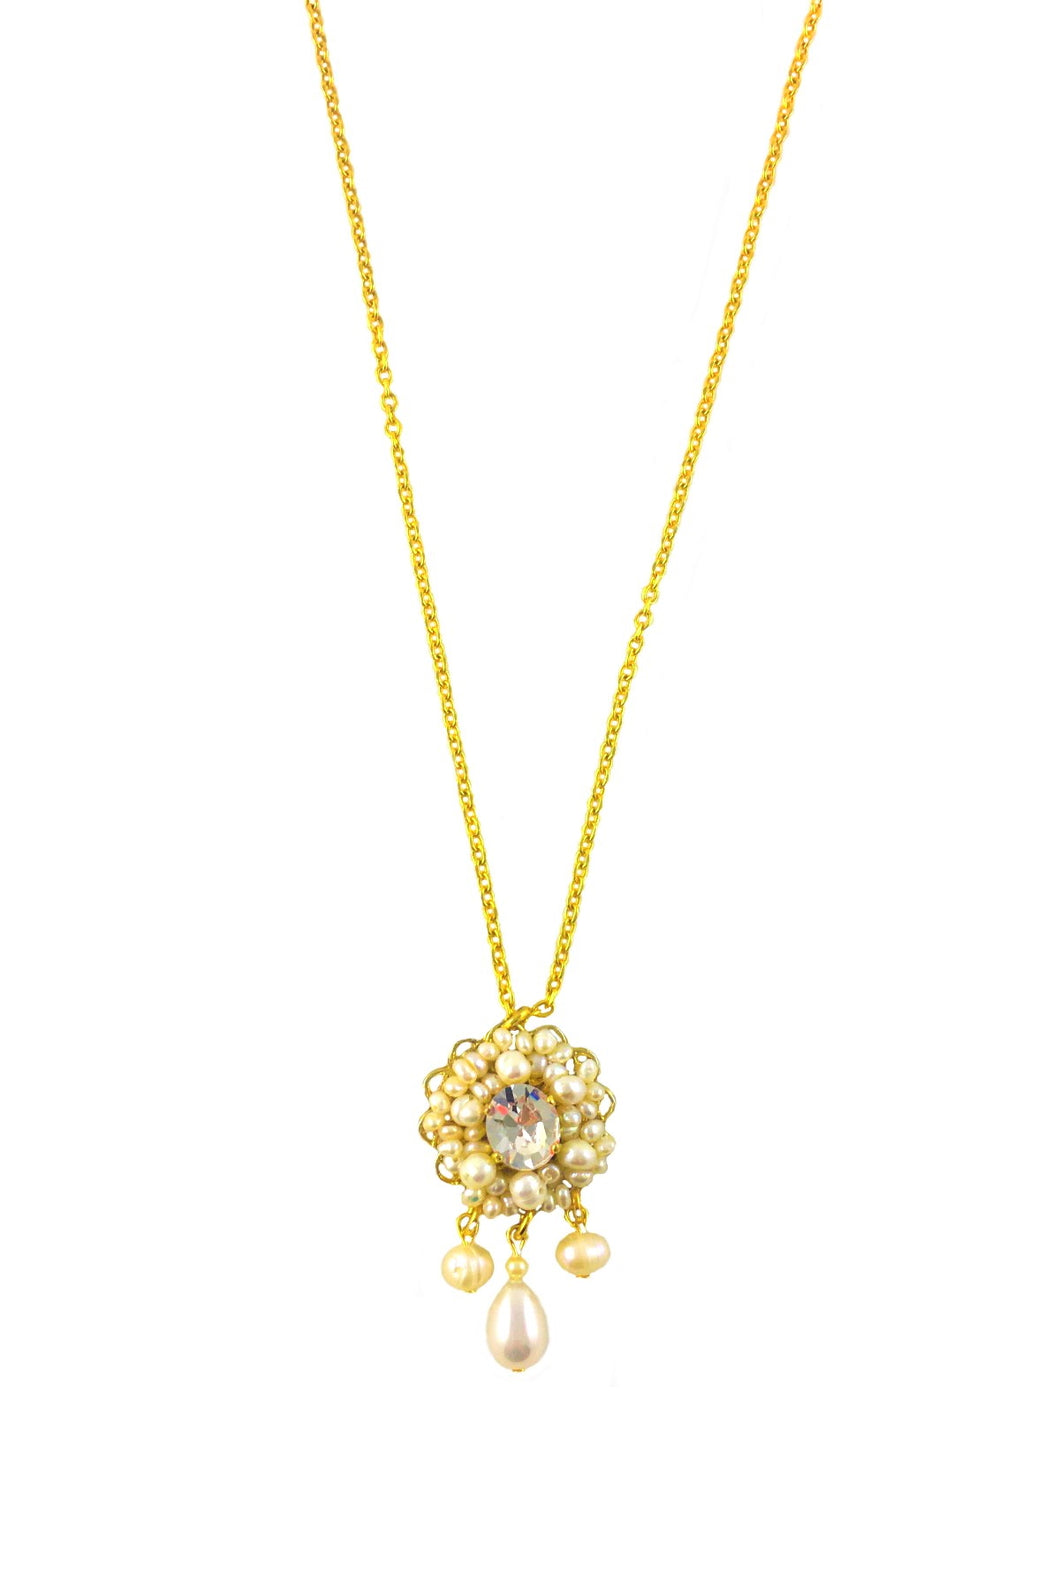 Adeline Gold Pearls and Swarovski crystal  Necklace